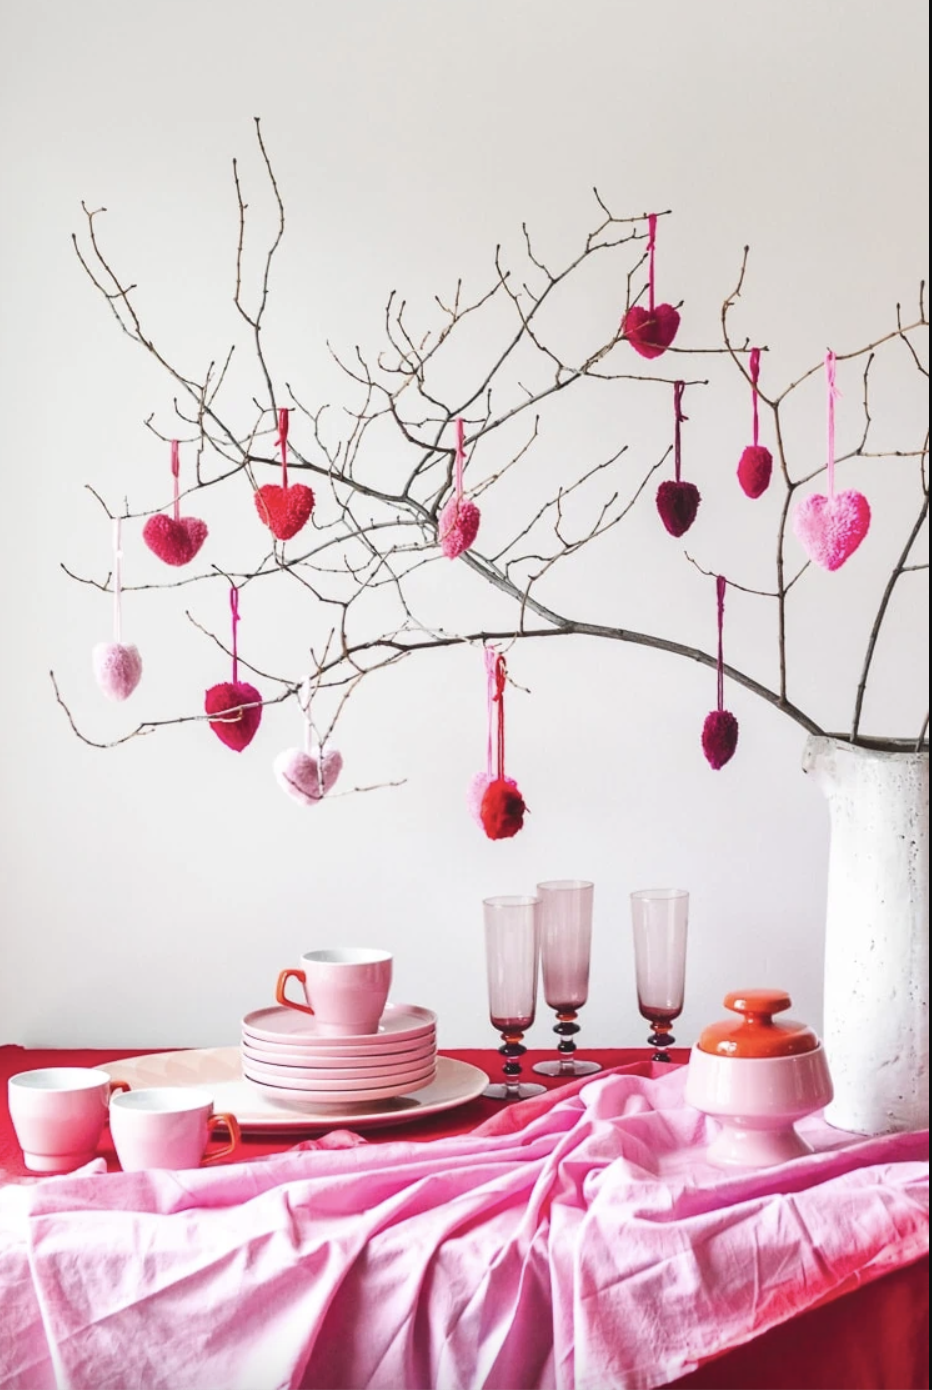 11 Diy Weekend Projects To Do Together For Valentine's Day